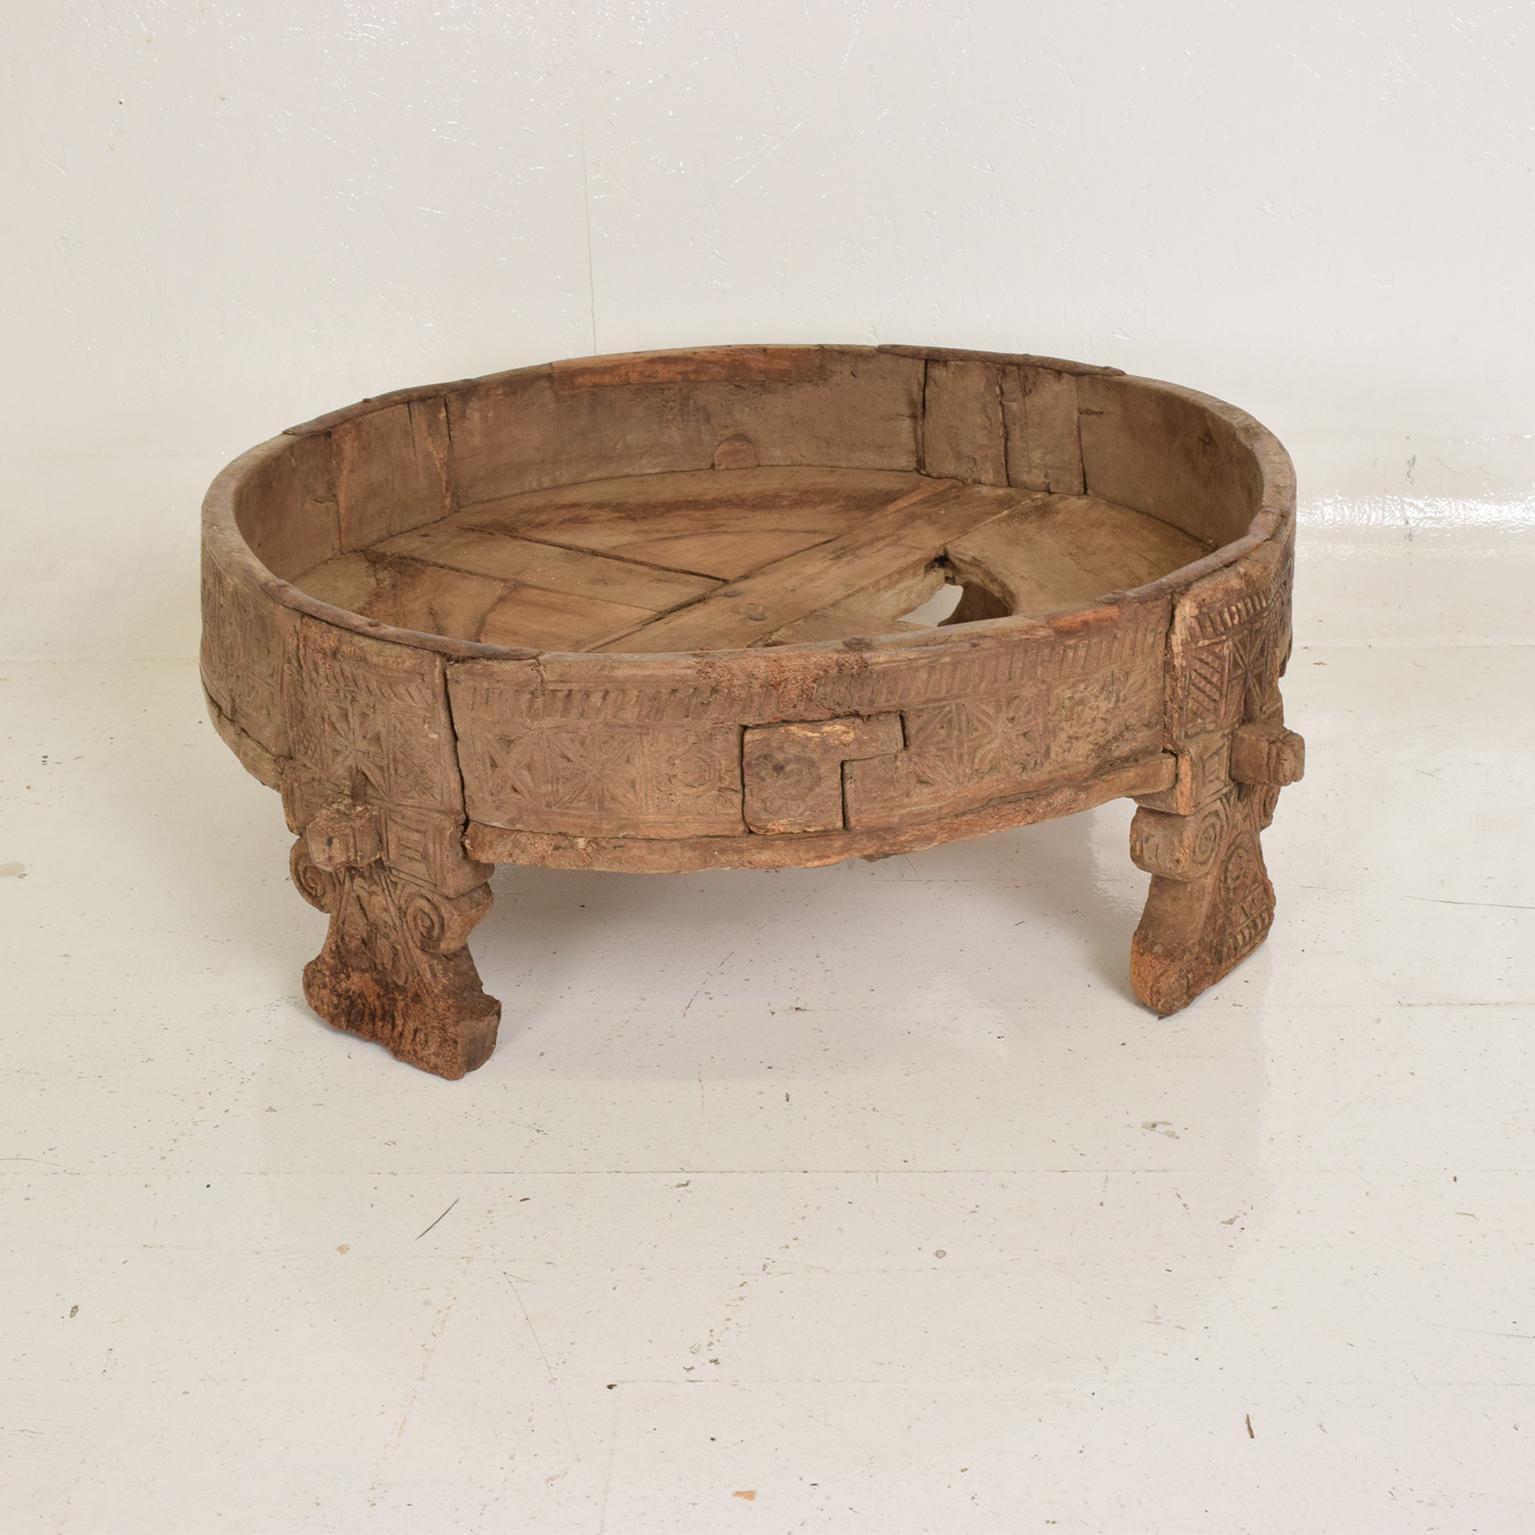 For your consideration: an antique rice washer wood planter base outdoor patio garden table

Dimensions: 30